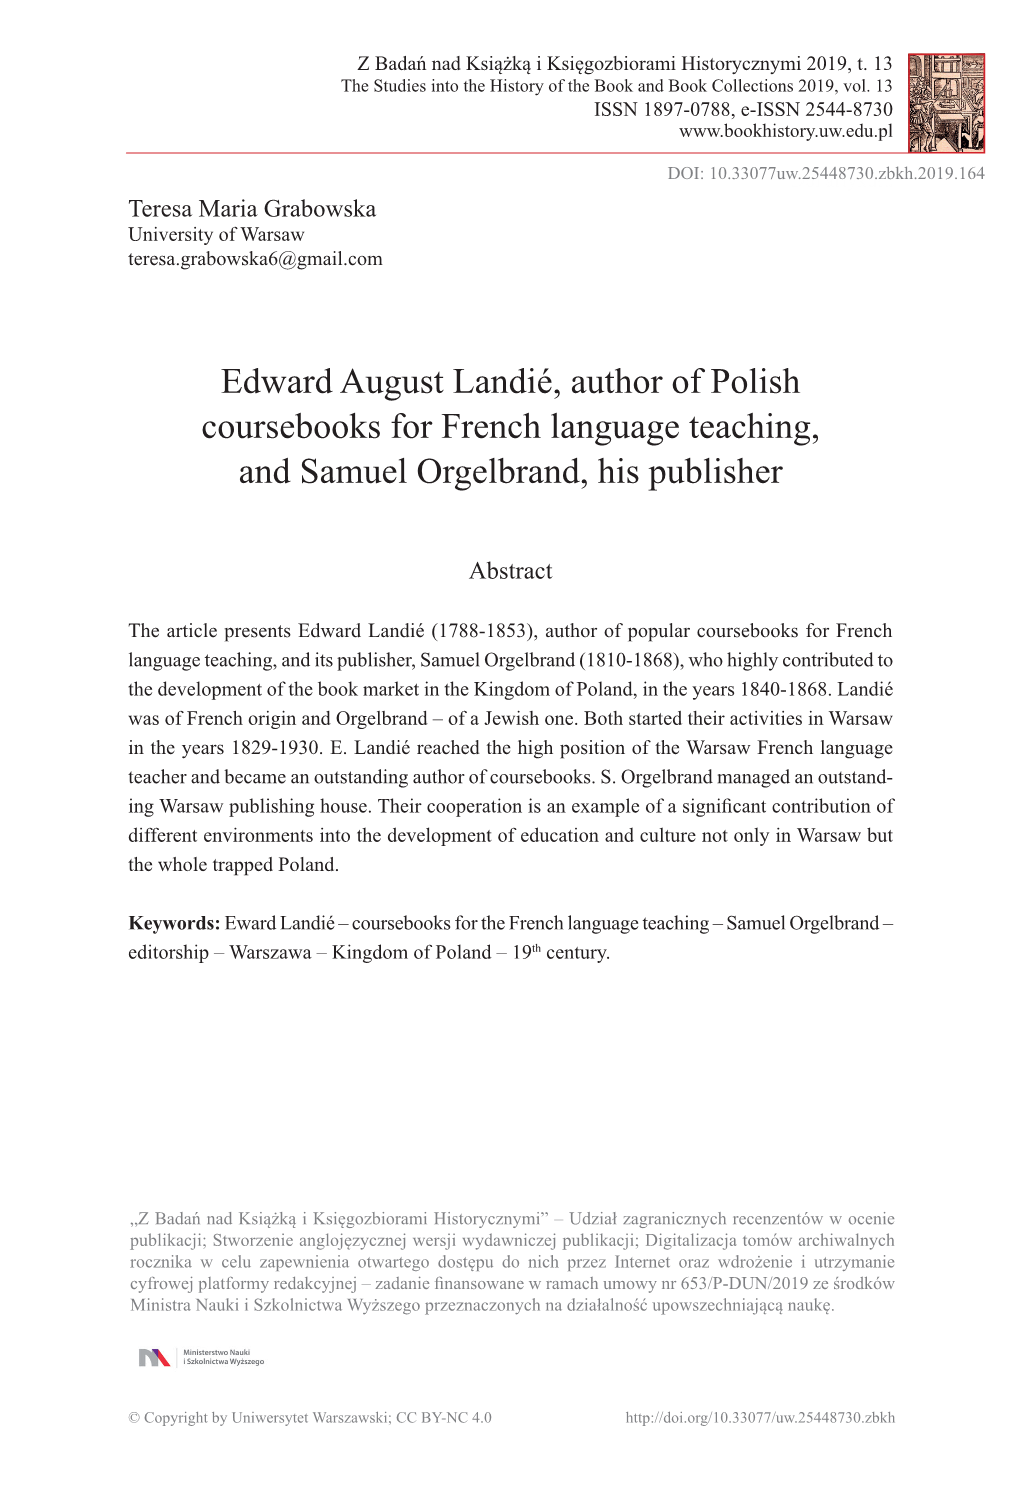 Edward August Landié, Author of Polish Coursebooks for French Language Teaching, and Samuel Orgelbrand, His Publisher